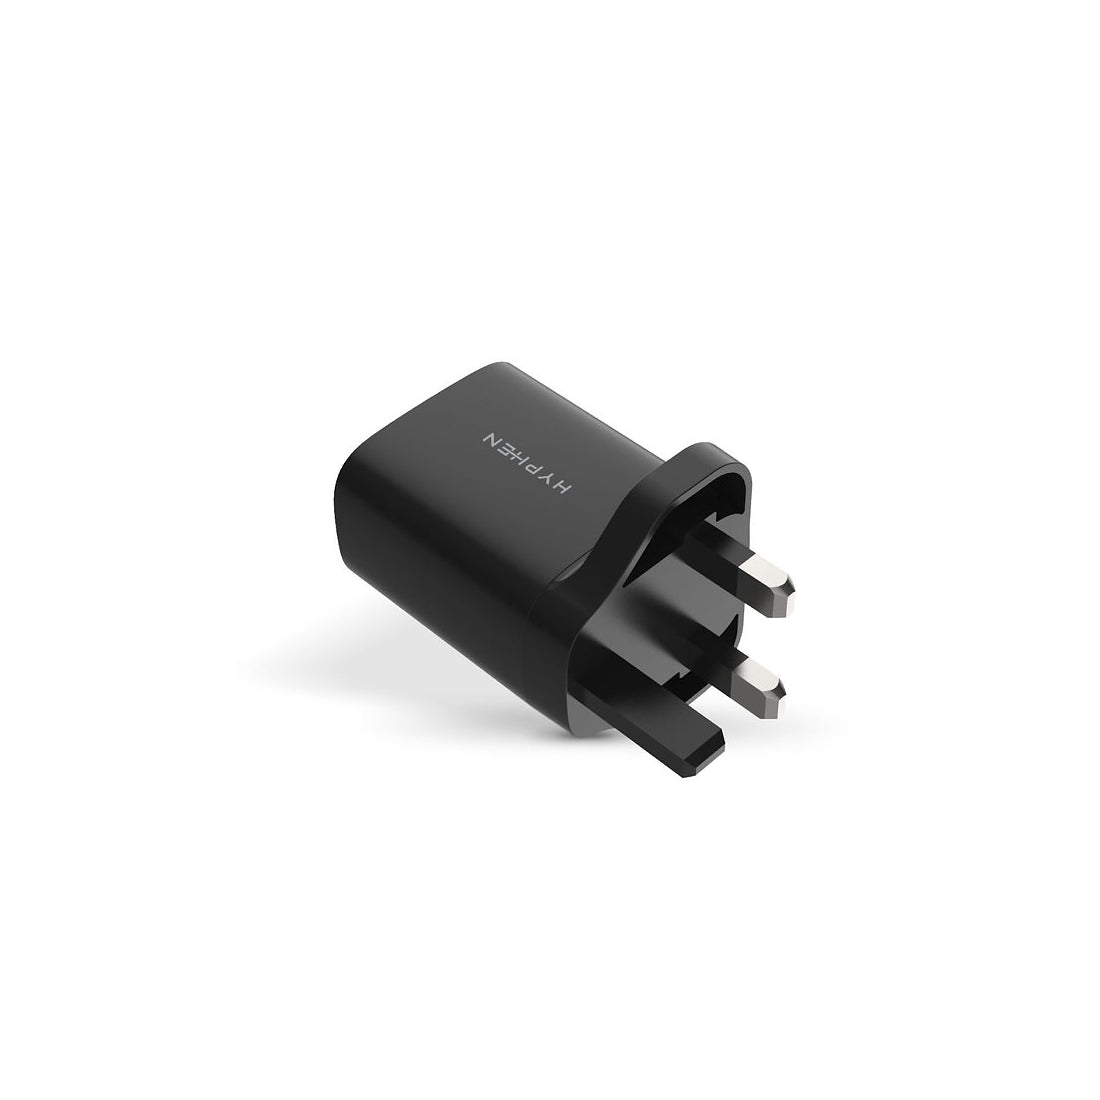 Hyphen VoltPort DUO PD Wall Charger - Black - شاحن - Store 974 | ستور ٩٧٤